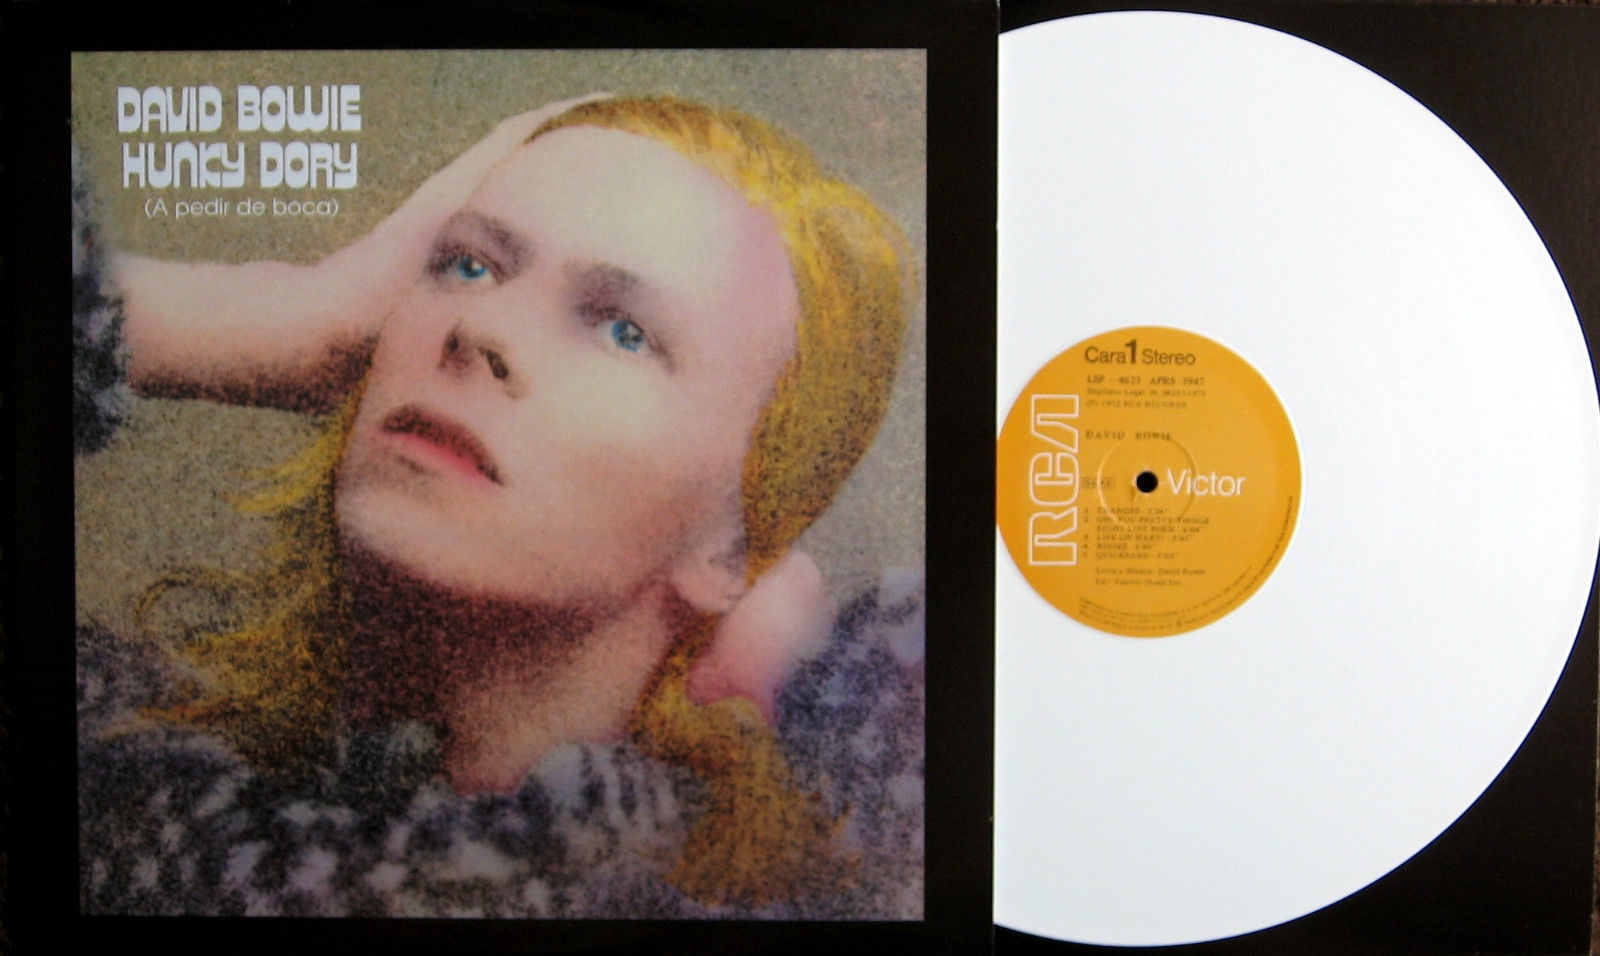 David Bowie – LP アナログレコード Hunky Dory